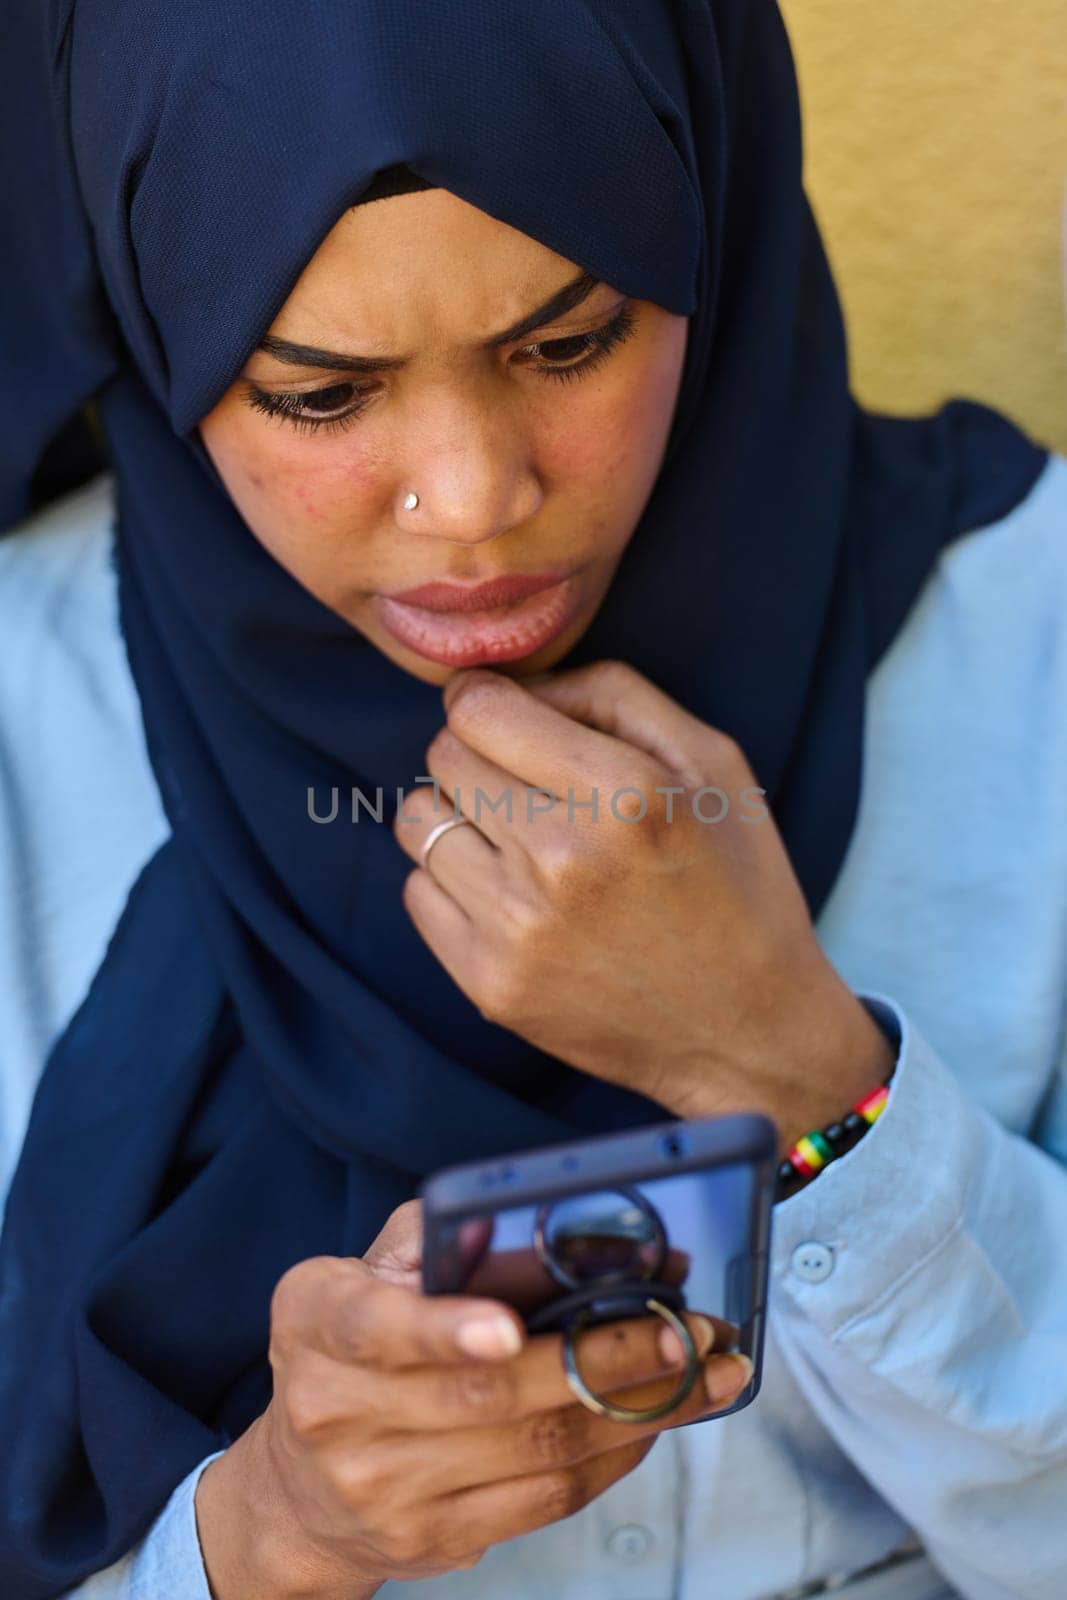 A close-up portrait captures the engagement of a Middle Eastern teenage Muslim girl in her digital world, as she uses a smartphone with focused attention